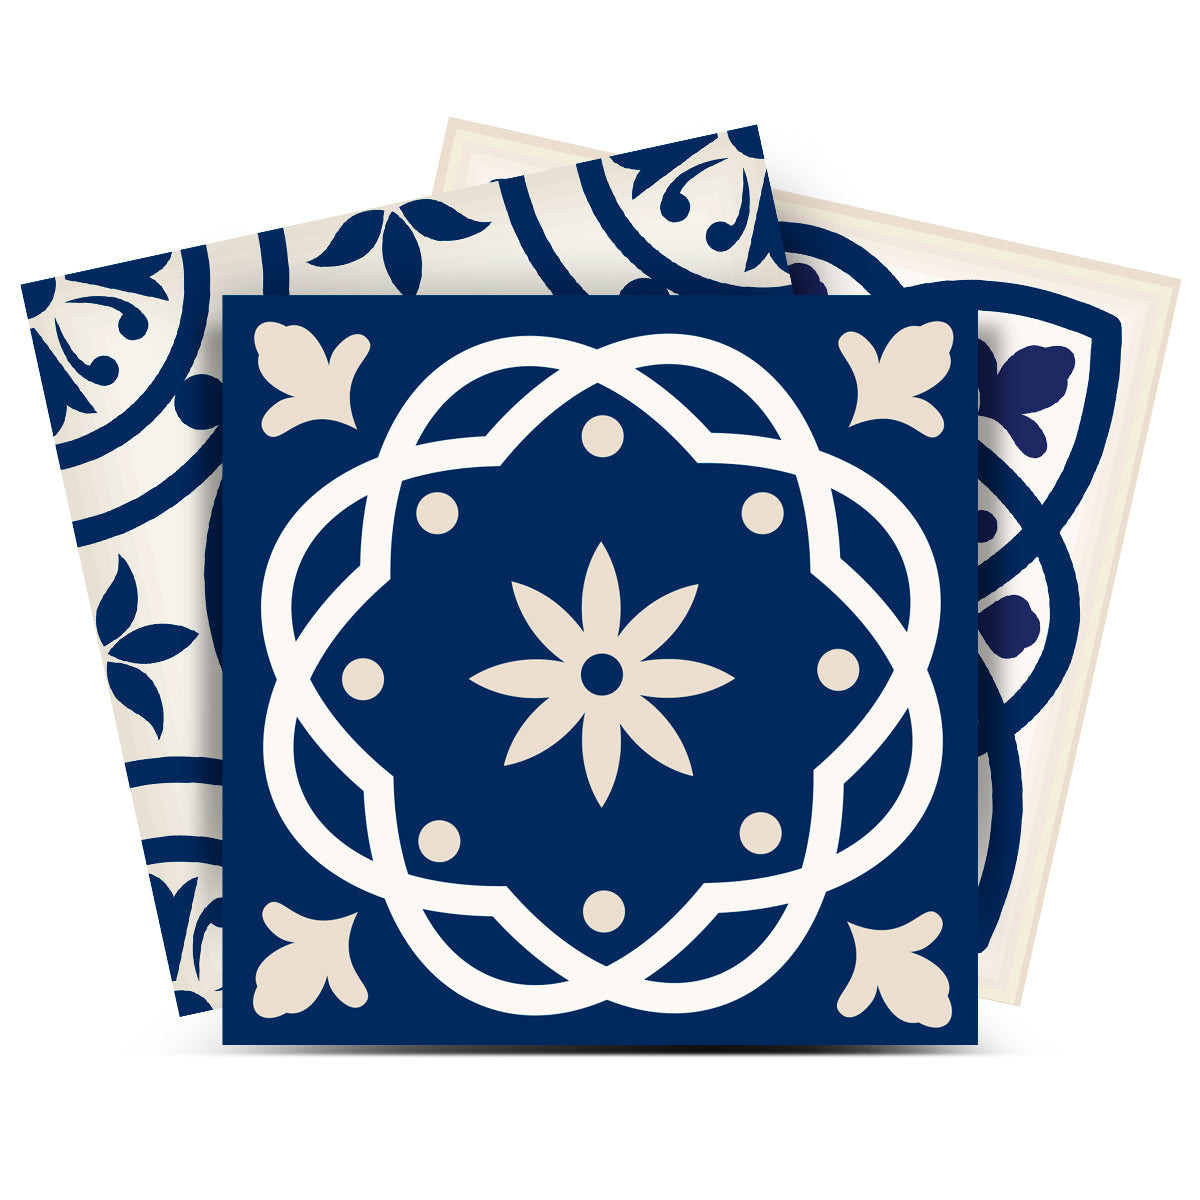 7" X 7" Midnight Blue And White Peel And Stick Removable Tiles-390656-1